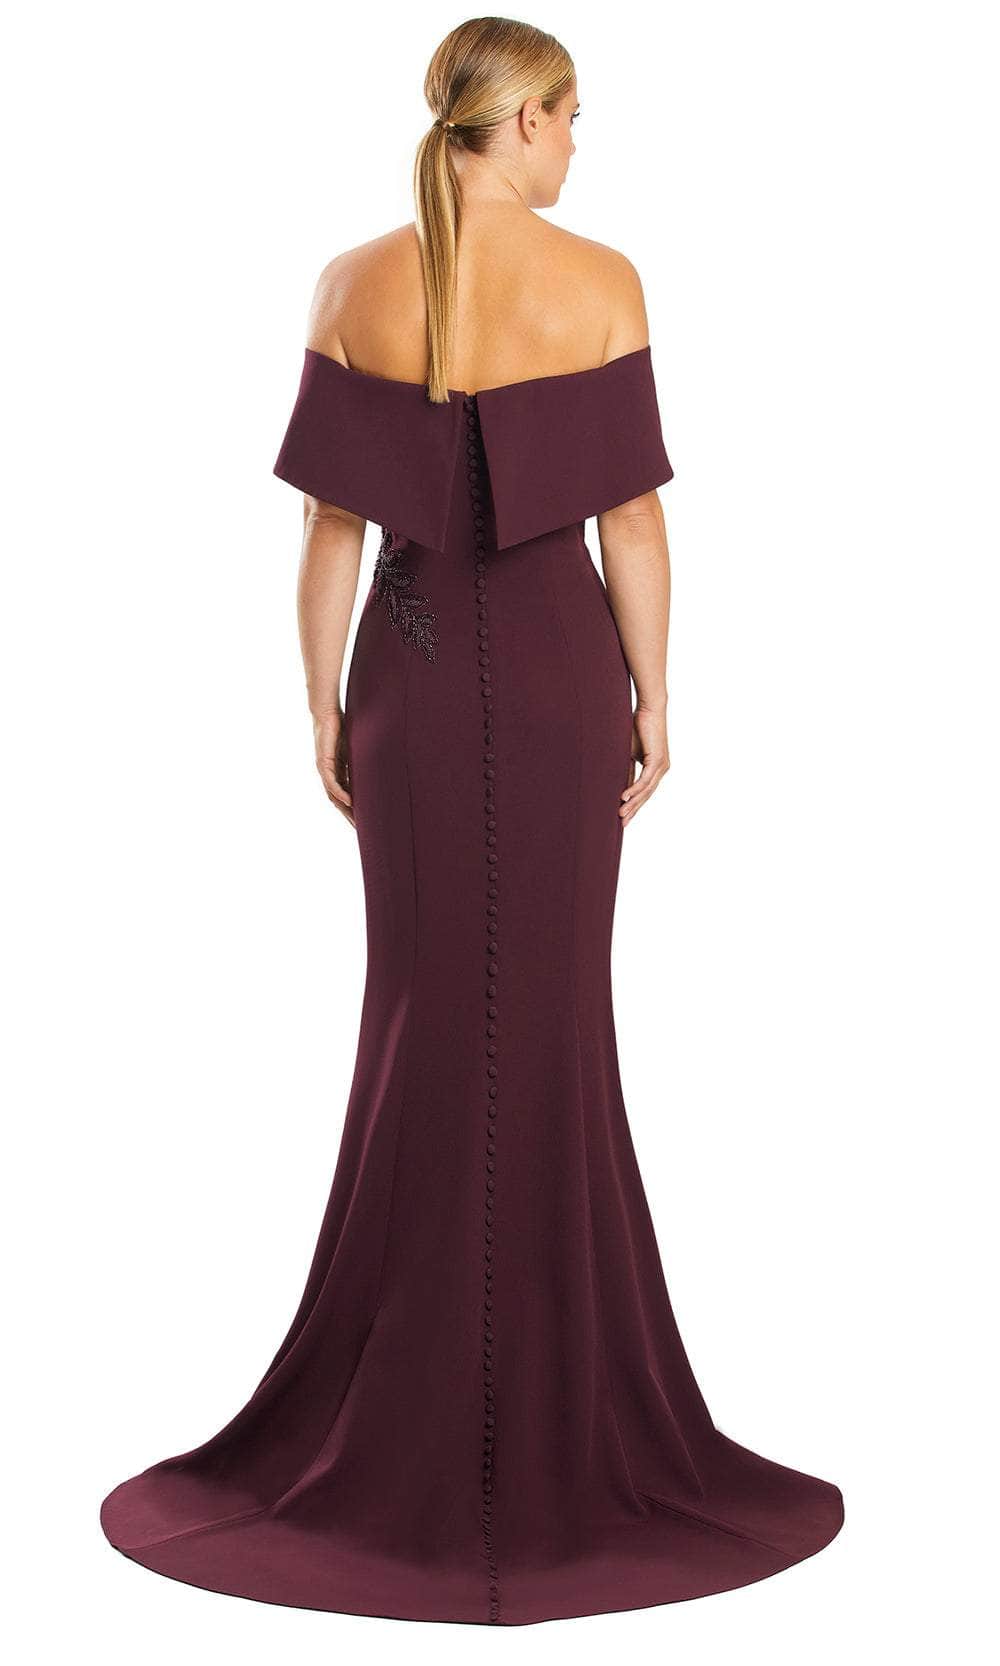 Alexander by Daymor 1853F23 - Buttoned Evening Gown